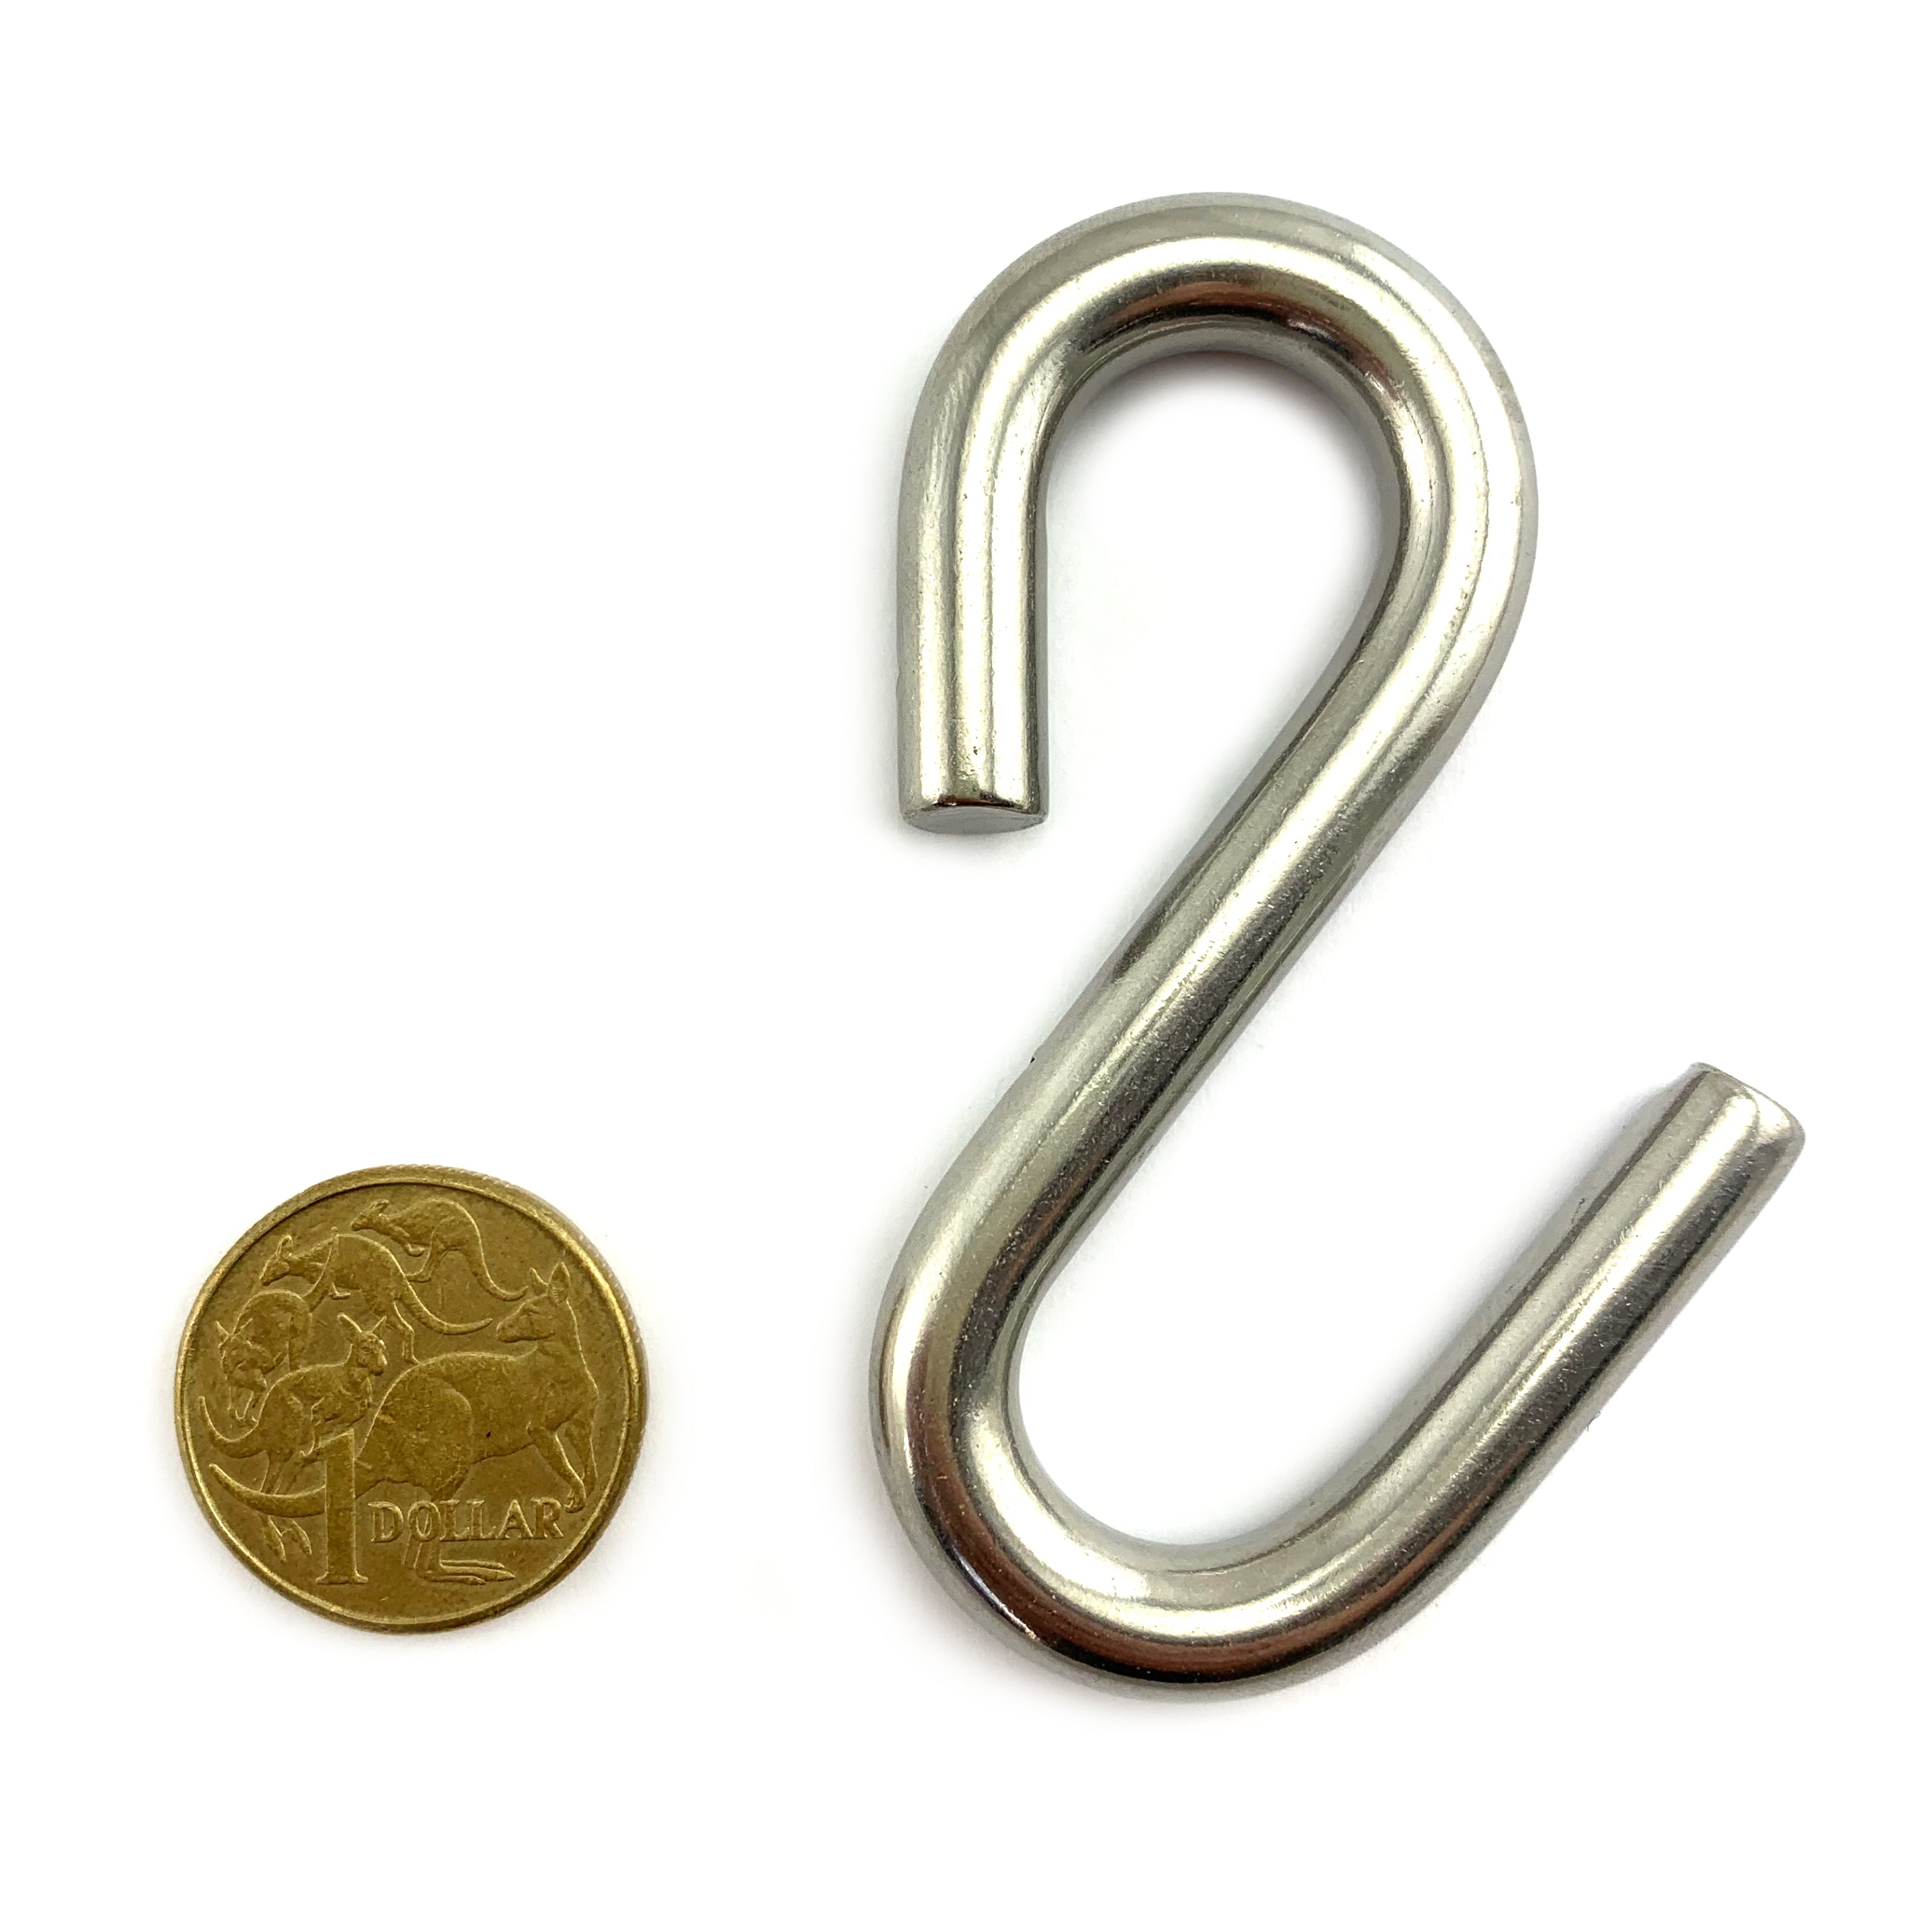 S-hook long arm in marine grade stainless steel. Australia wide Shipping. Shop hardware online chain.com.au.